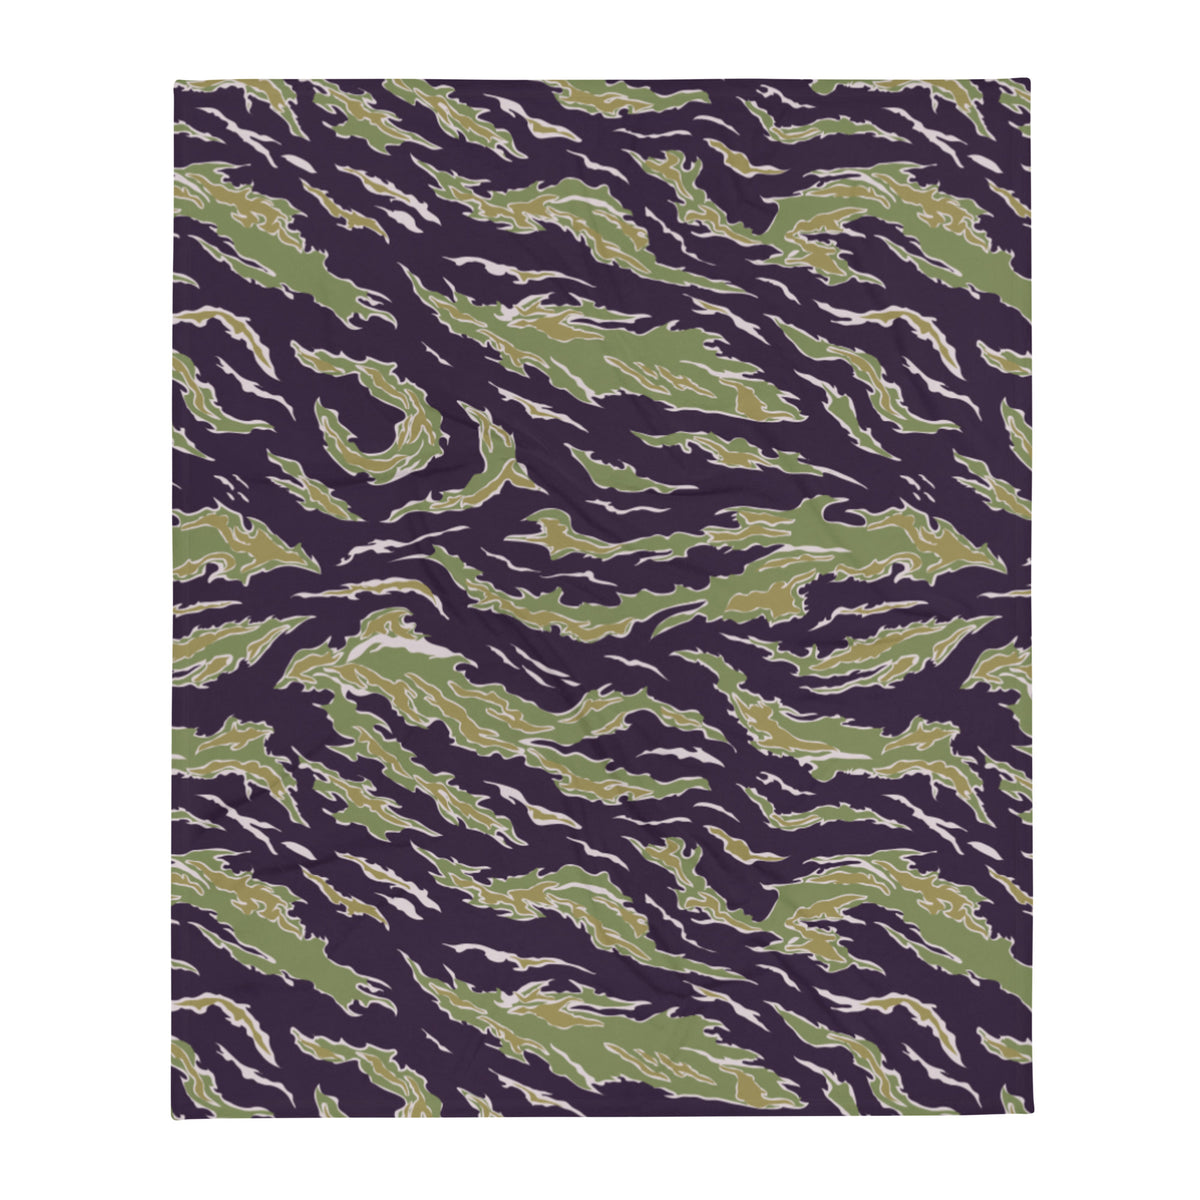 Tiger Stripe Jungle Camouflage Tactical Throw Blanket